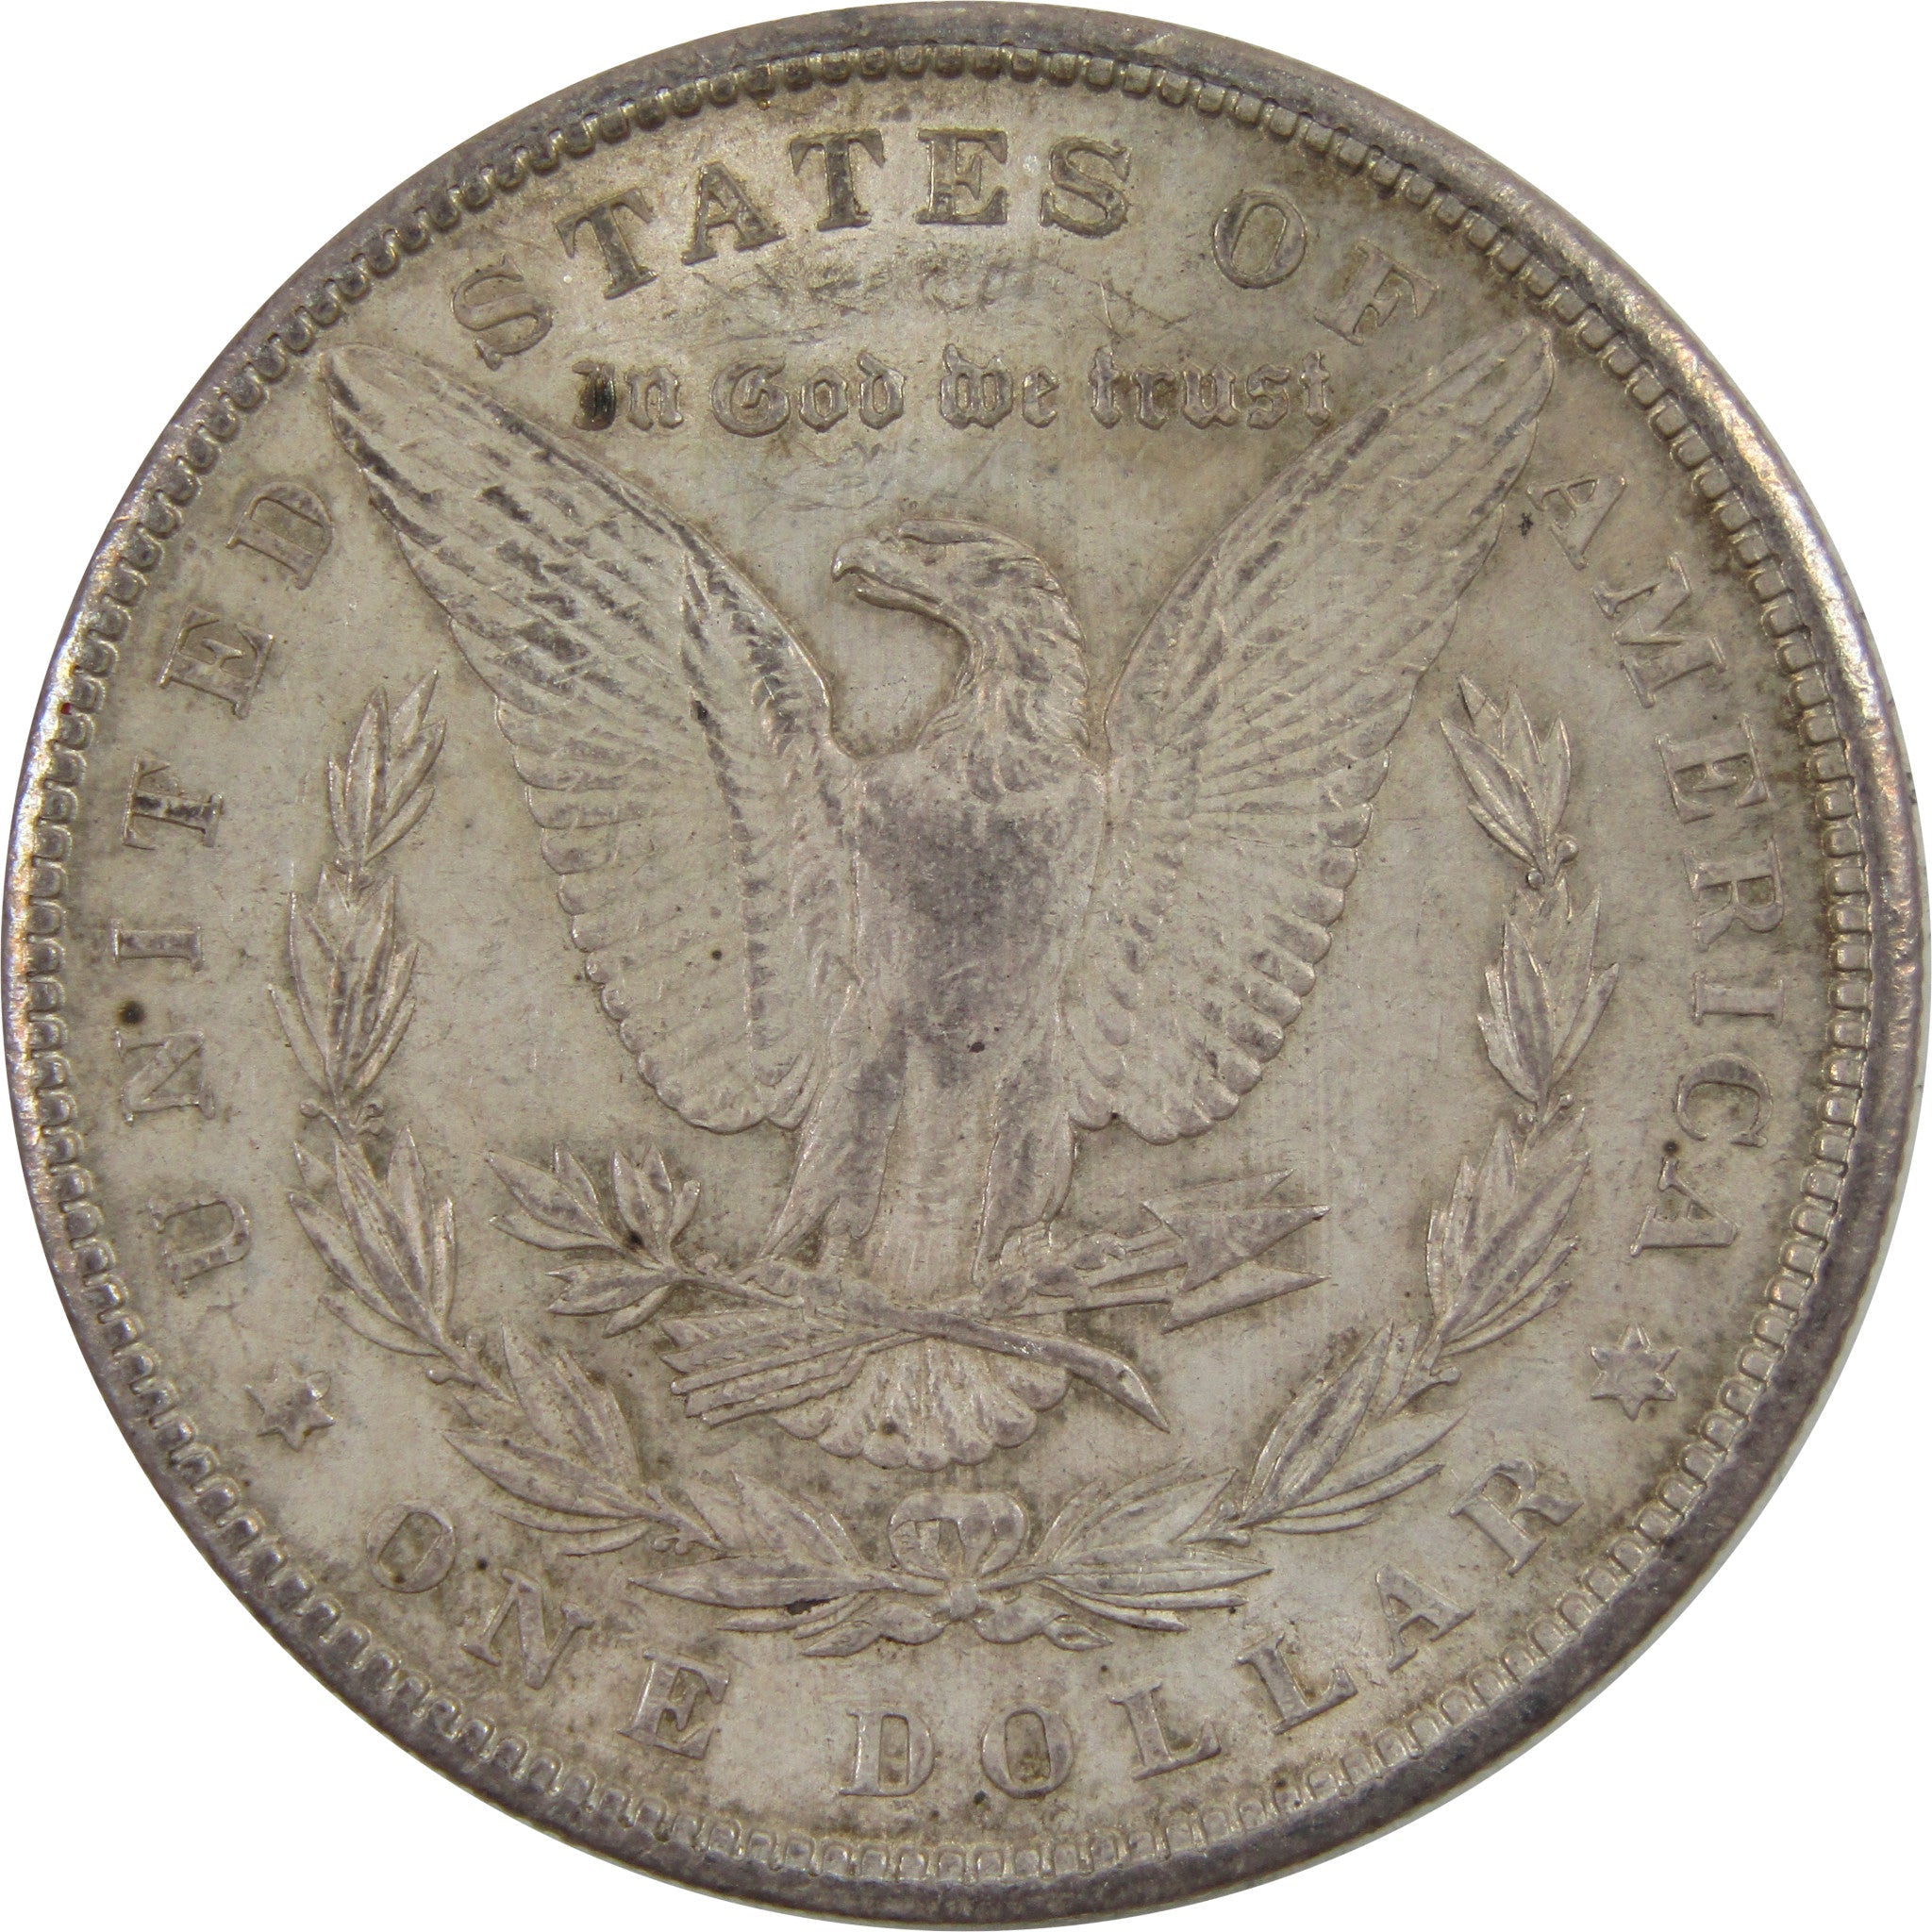 1900 Morgan Dollar AU About Uncirculated 90% Silver $1 Coin SKU:I5504 - Morgan coin - Morgan silver dollar - Morgan silver dollar for sale - Profile Coins &amp; Collectibles